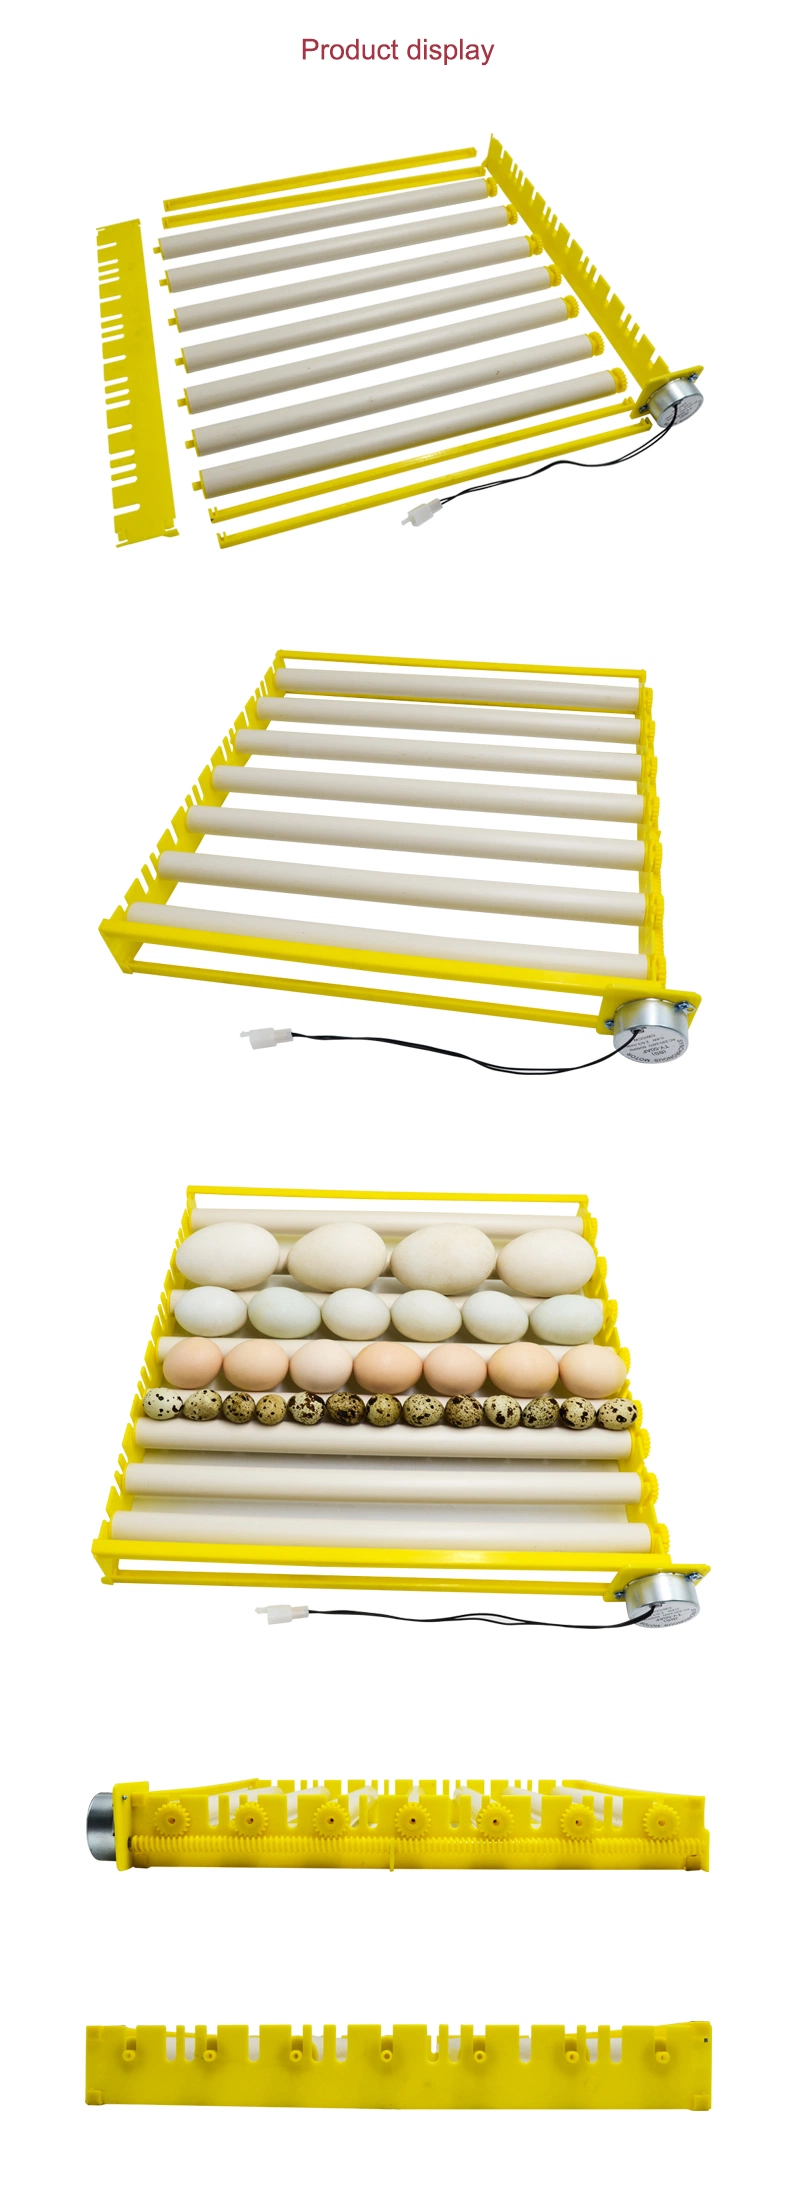 Best Sale Egg Tray Roller Automatic Egg Turning Tray